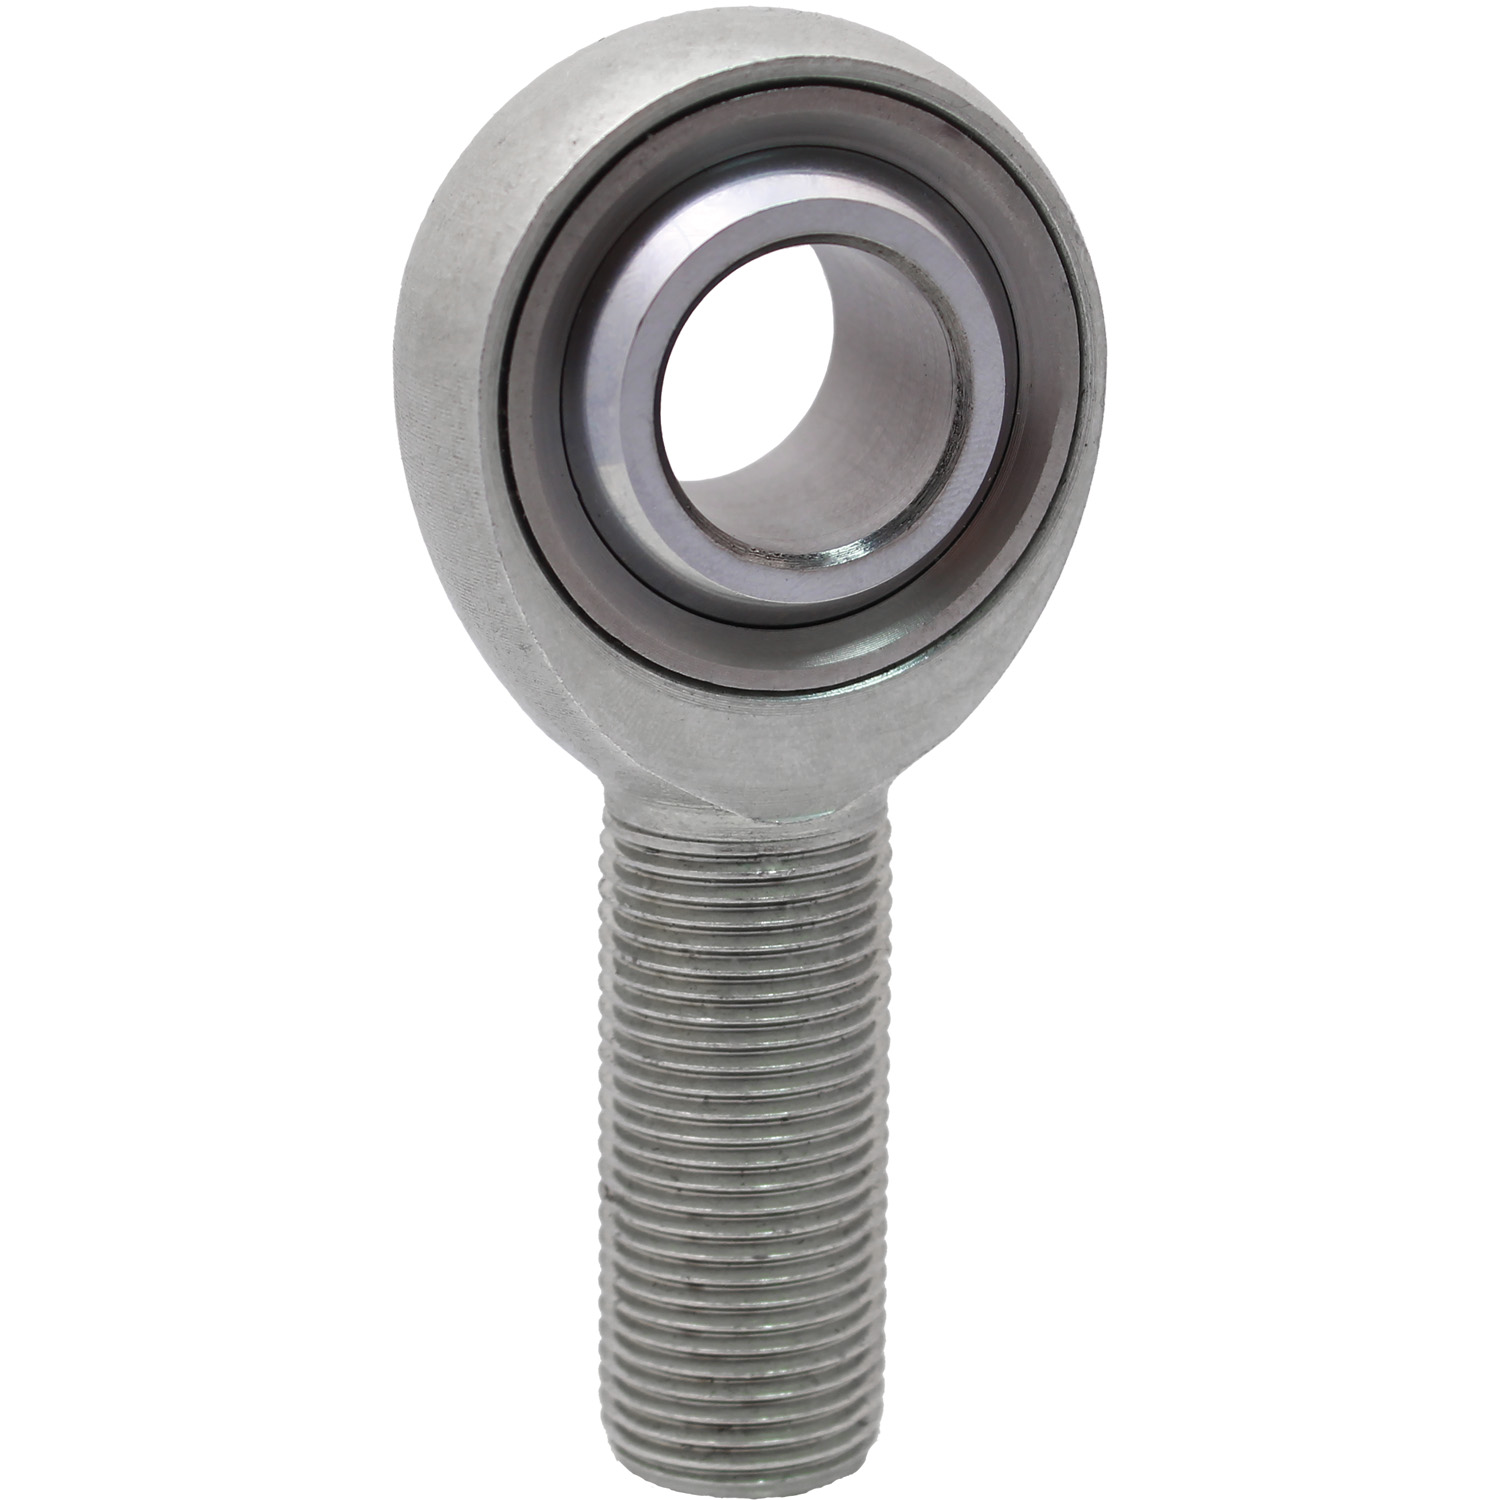 HM Series Rod End Hole I.D.: .1900 in.